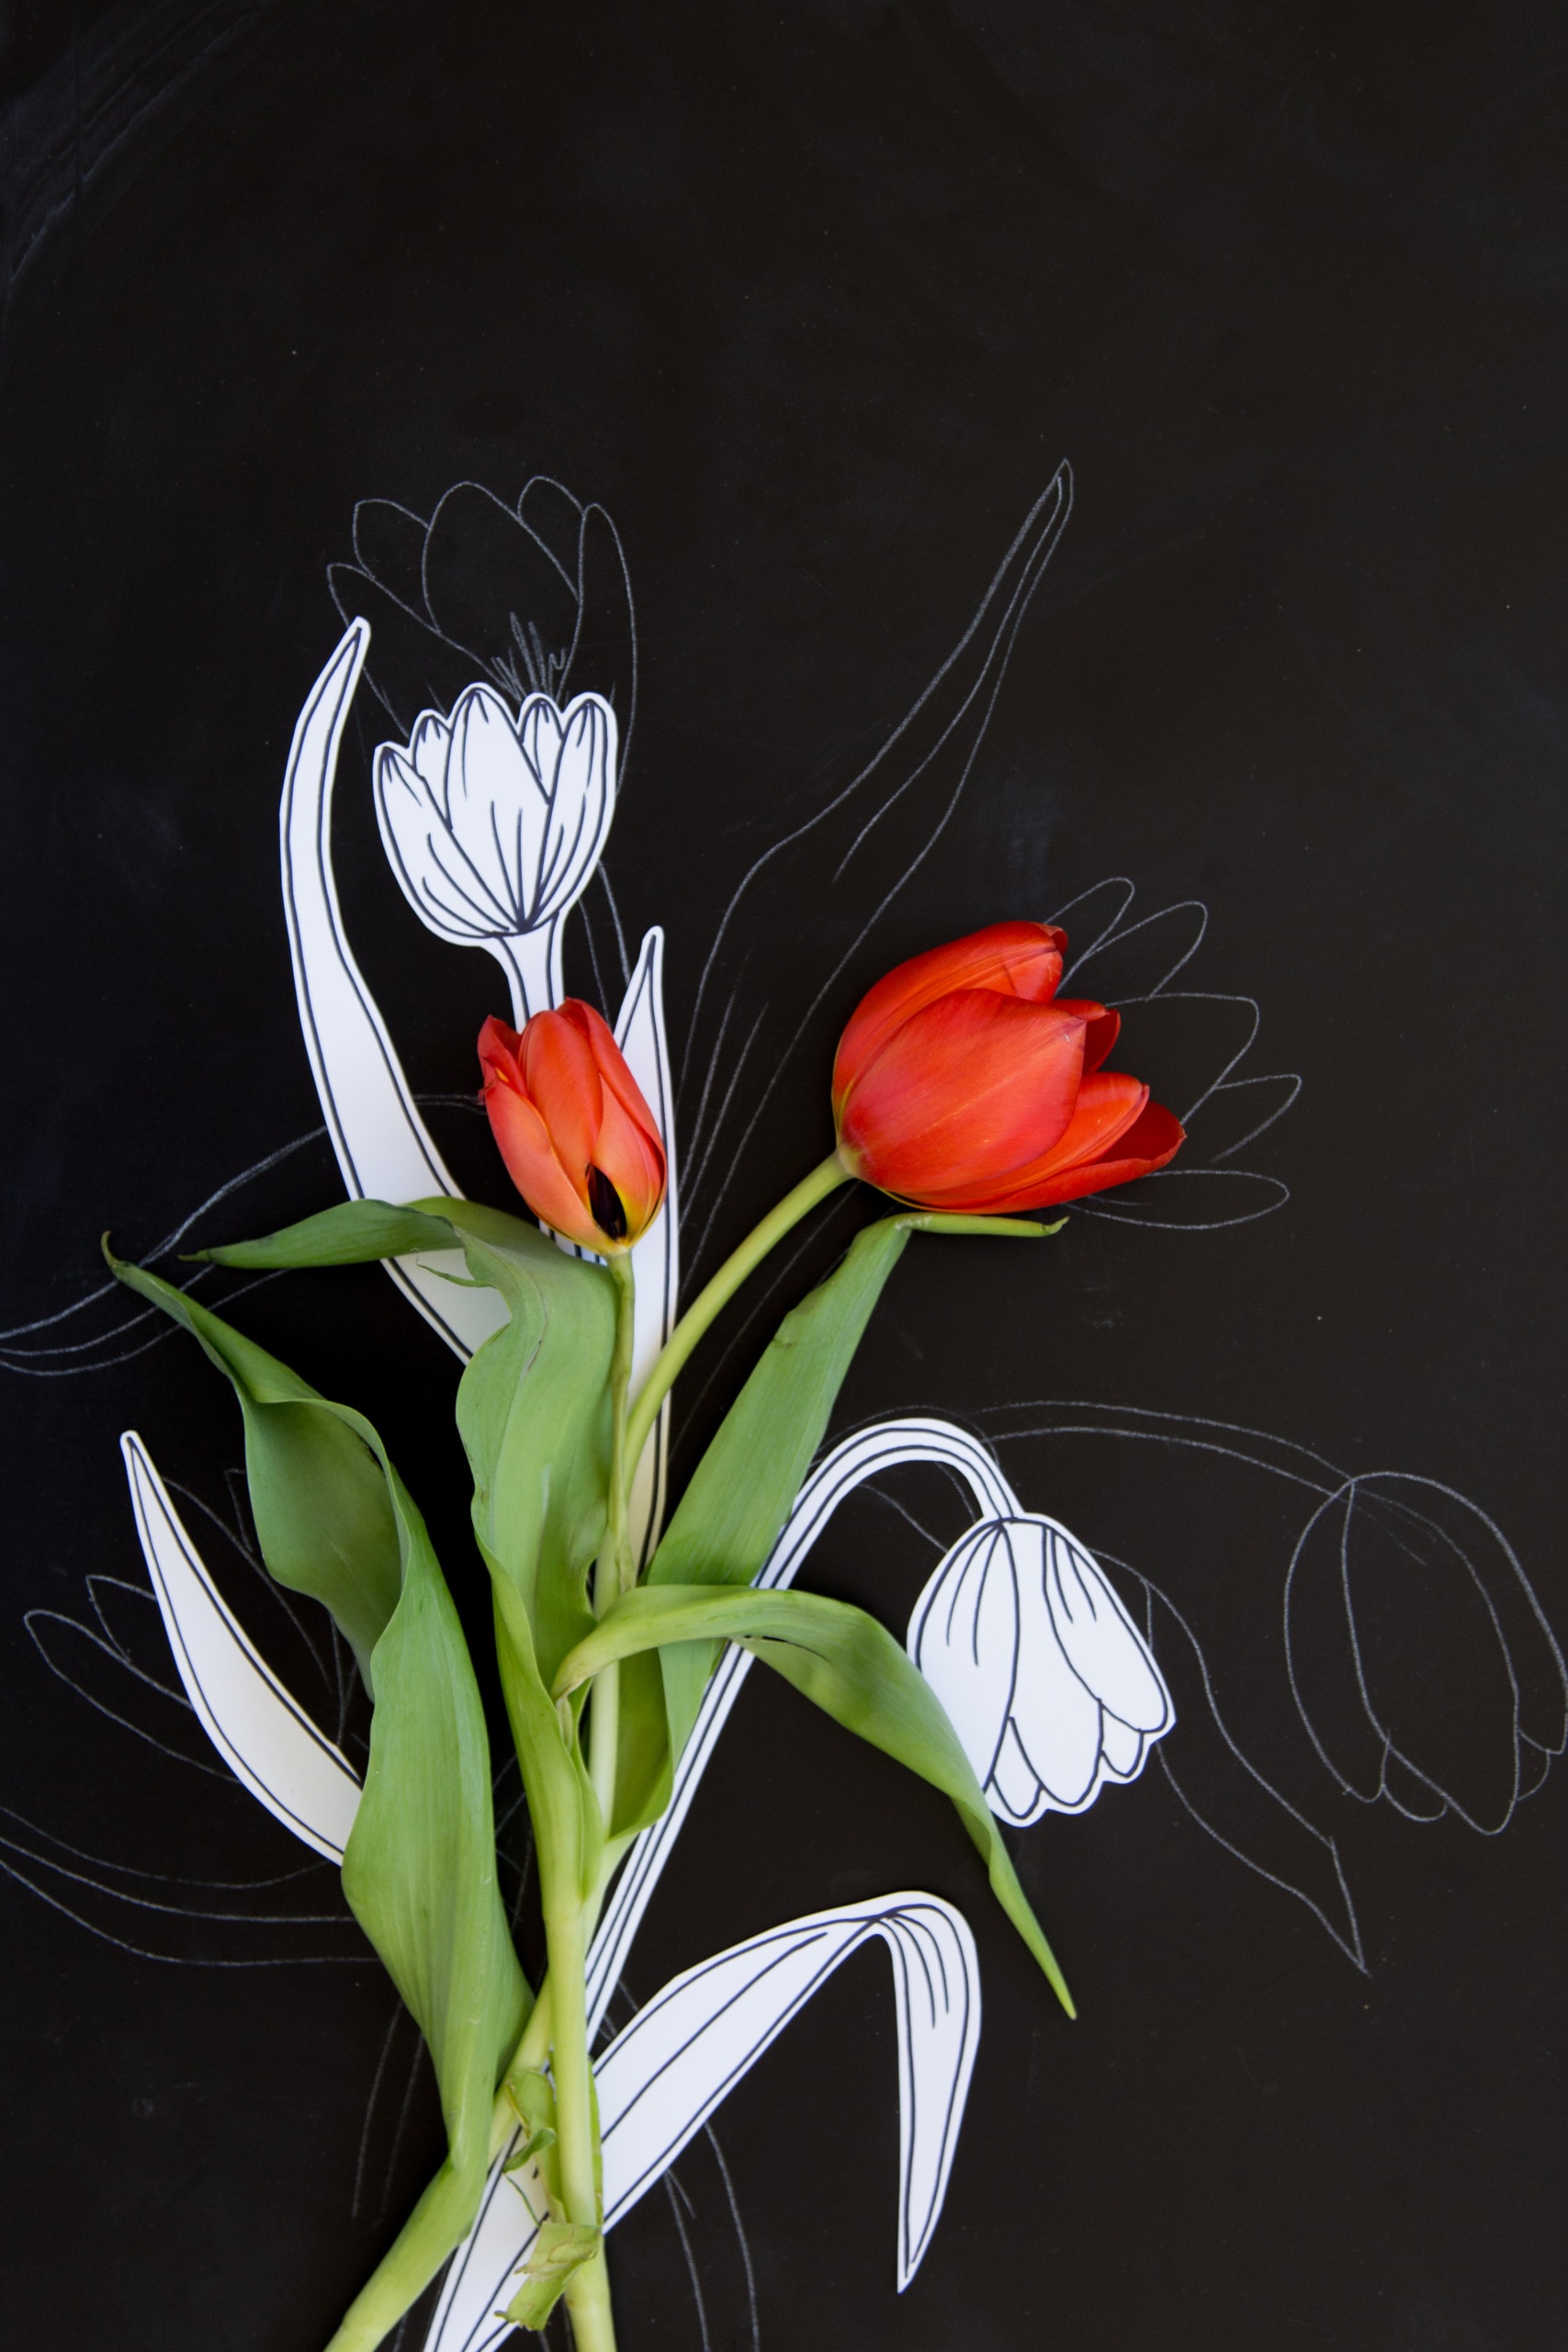 A few red tulips and cutout drawings of tulips against a black background.